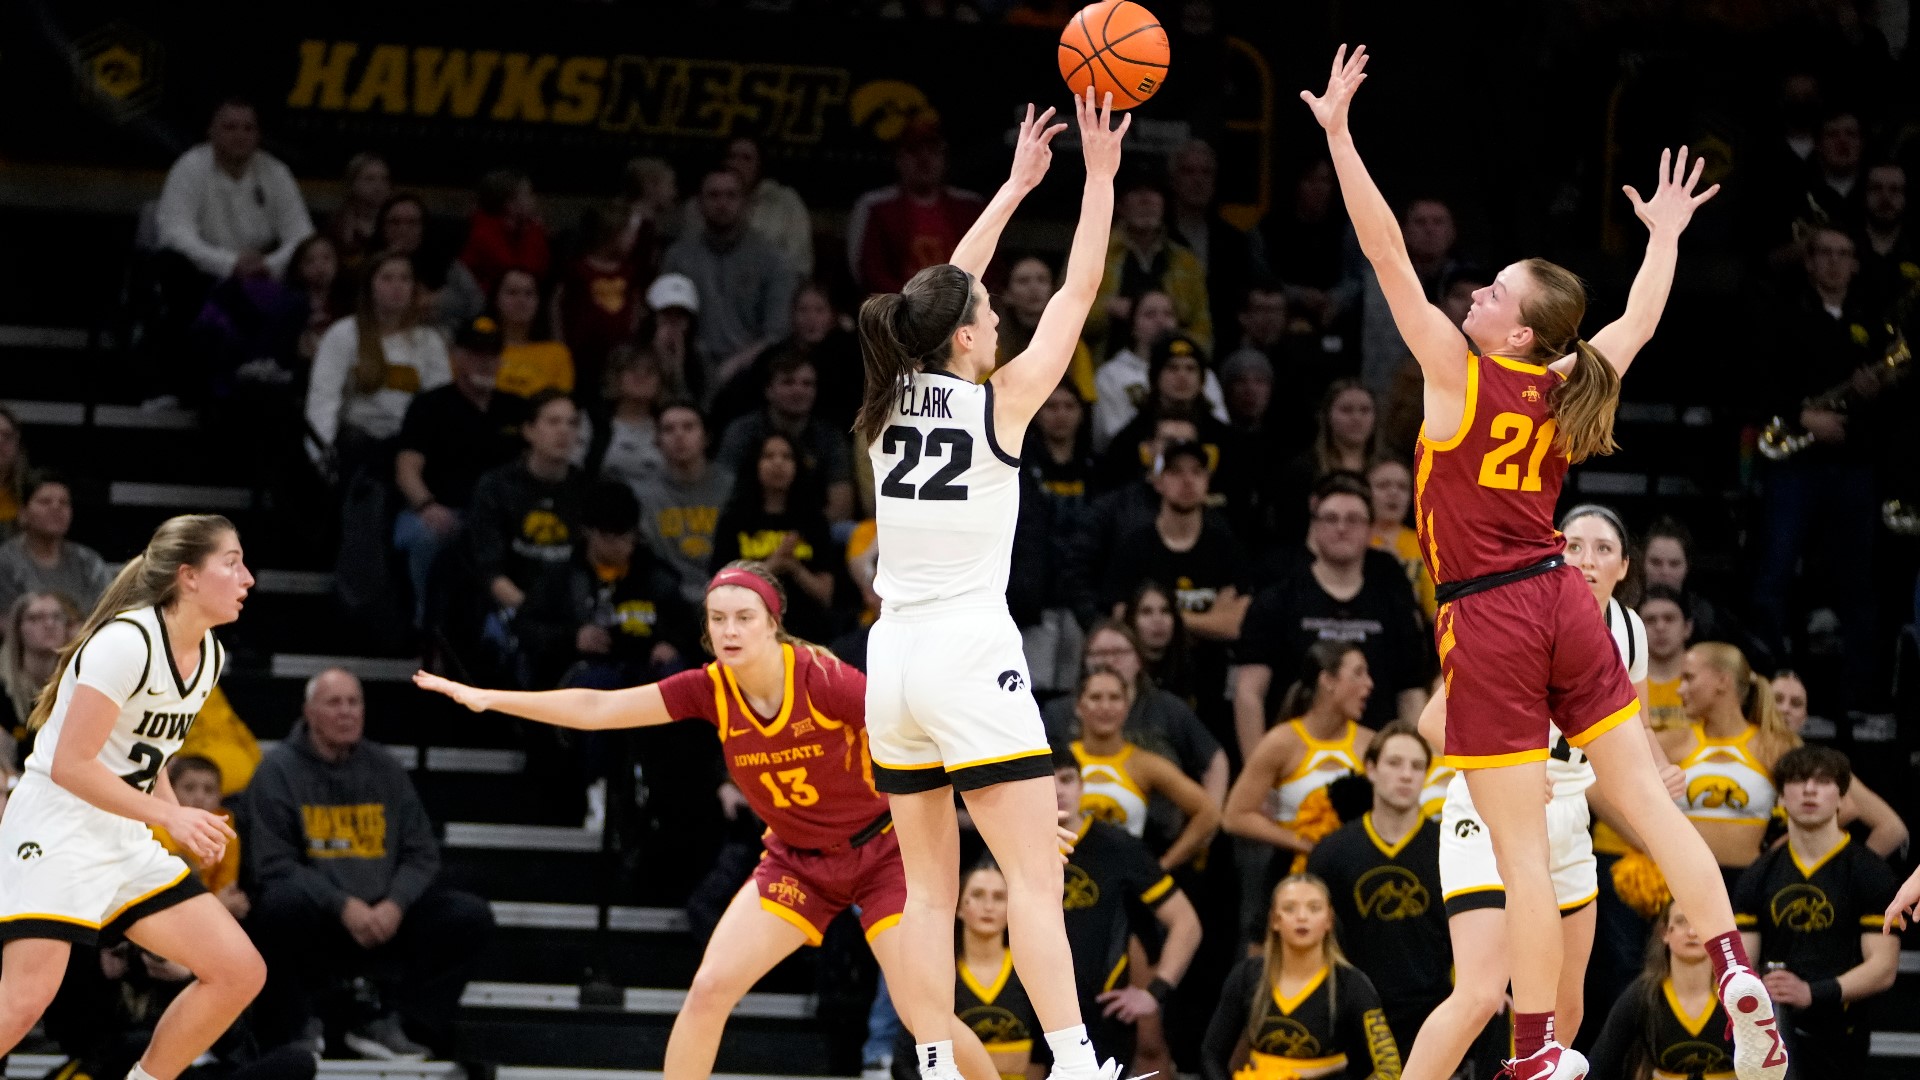 Kate Martin added 13 points for the Hawkeyes, who have won six of the last seven games in the rivalry and are 7-3 overall.